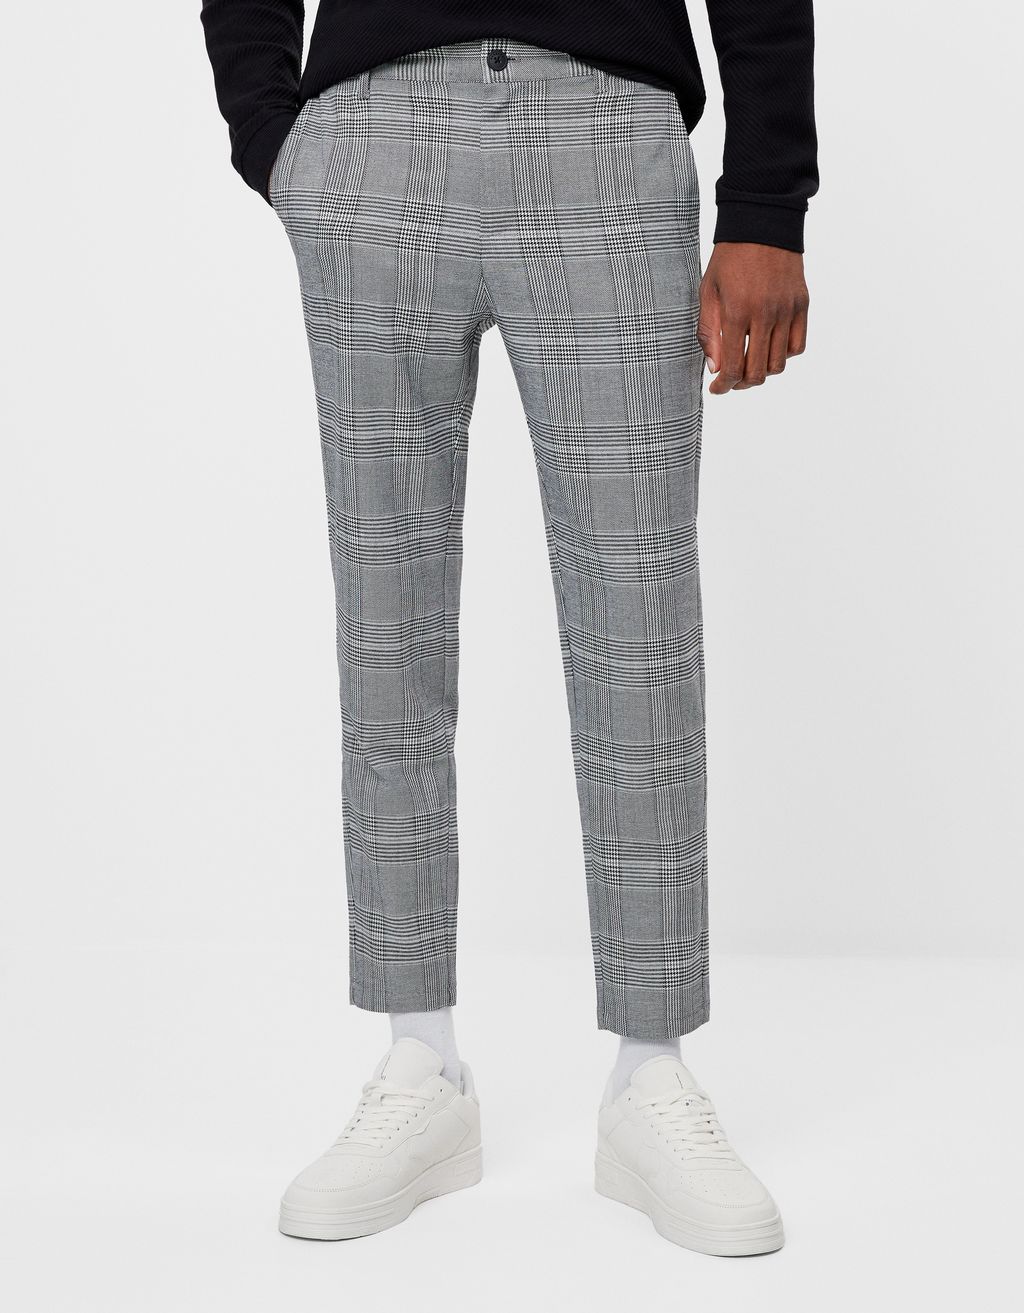 skinny tailored trousers